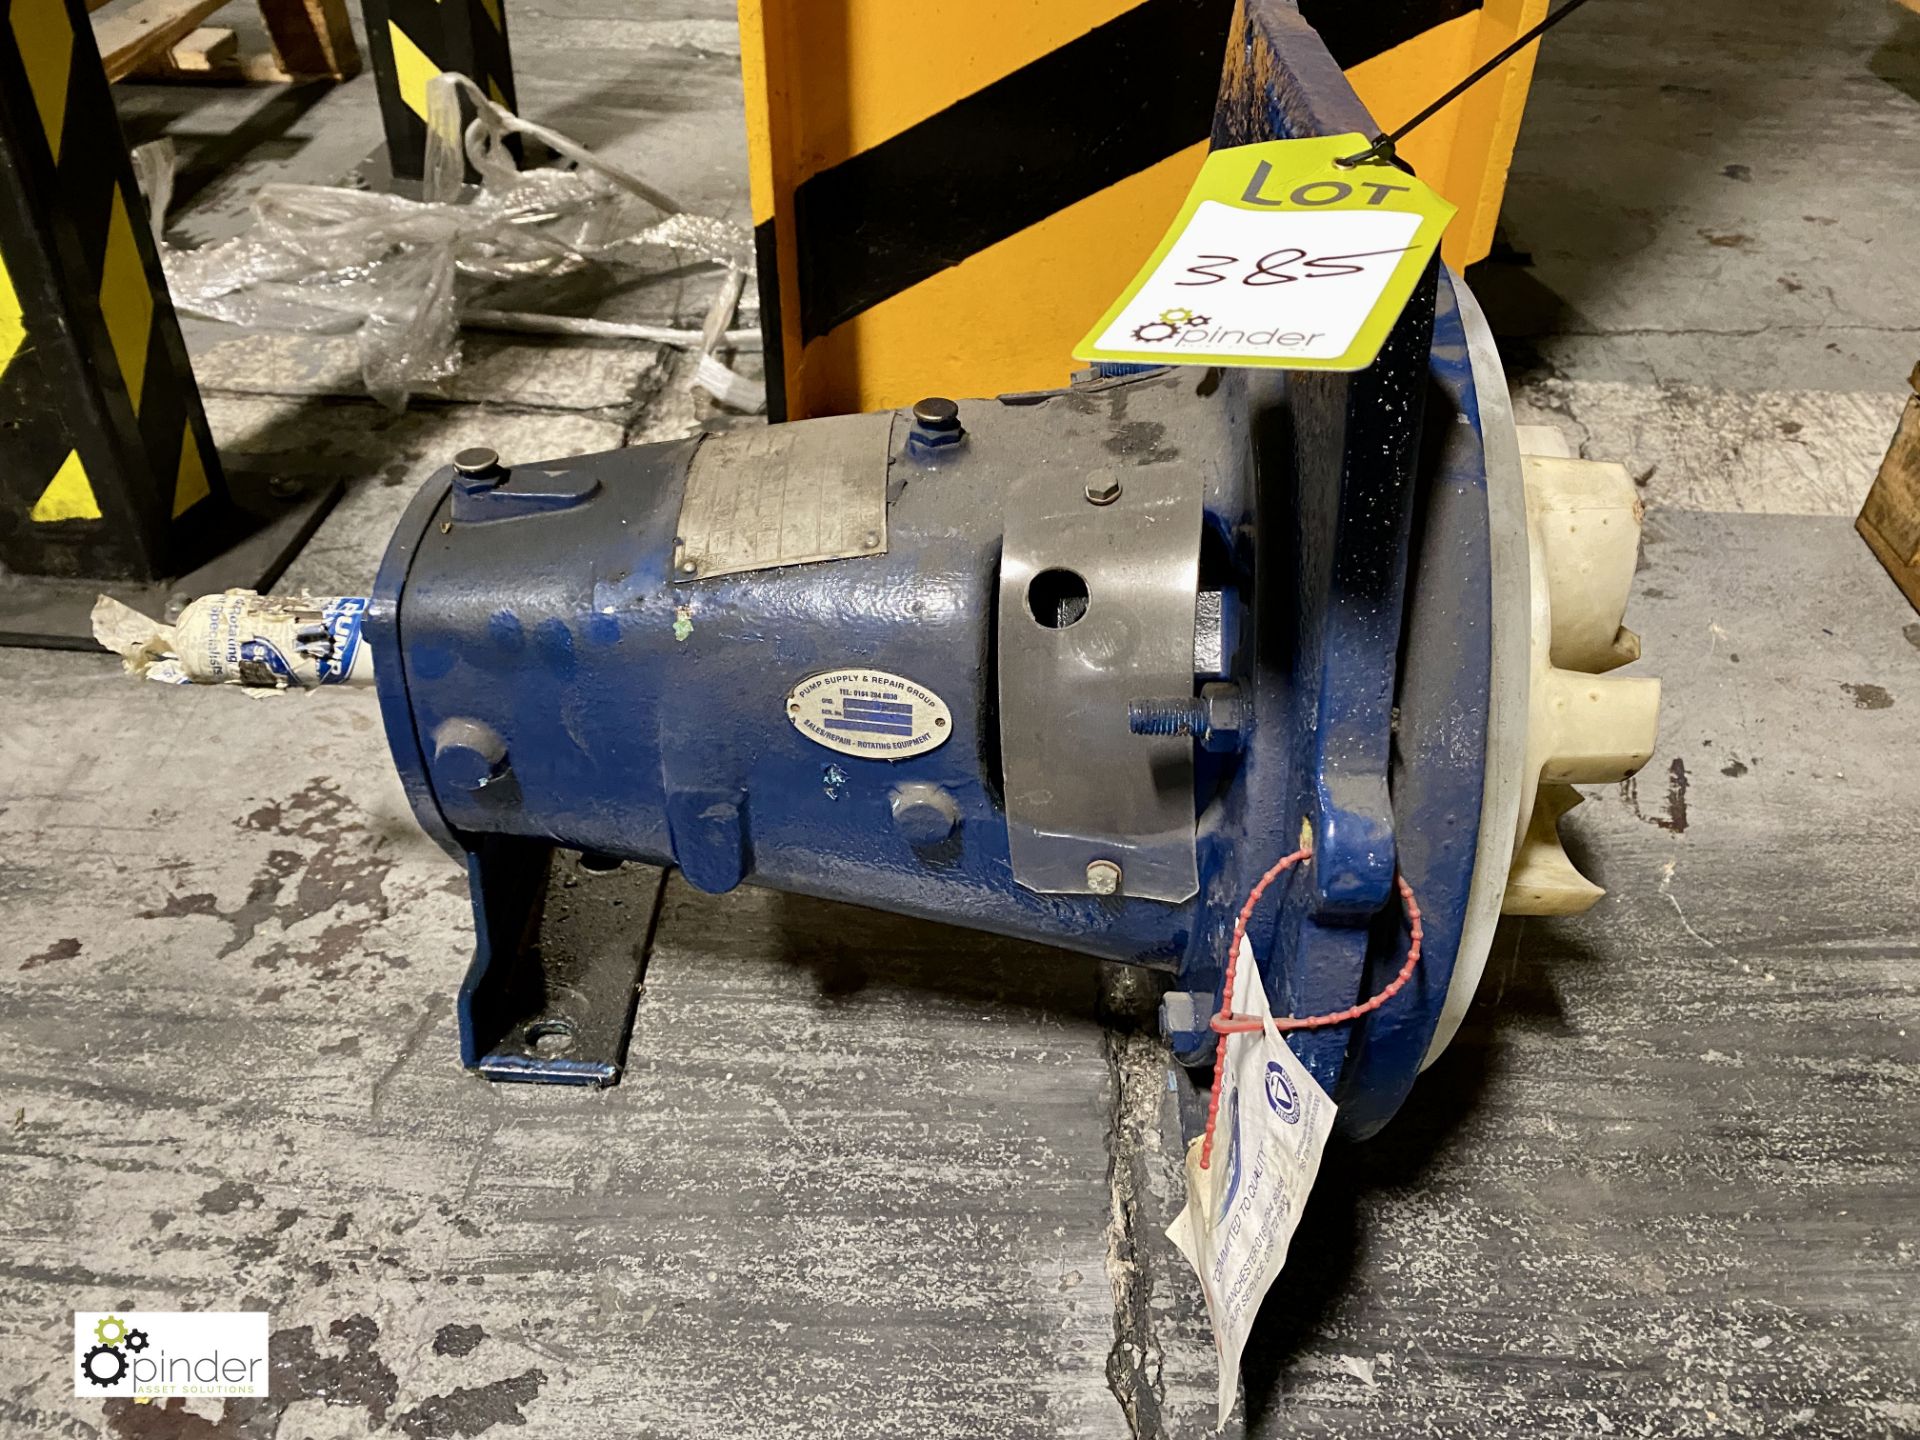 Wernert NEPO 125-80-200 Centrifugal Pump rear pull-out, no volute, S/N 01-0570, 110m3/hr, Impeller